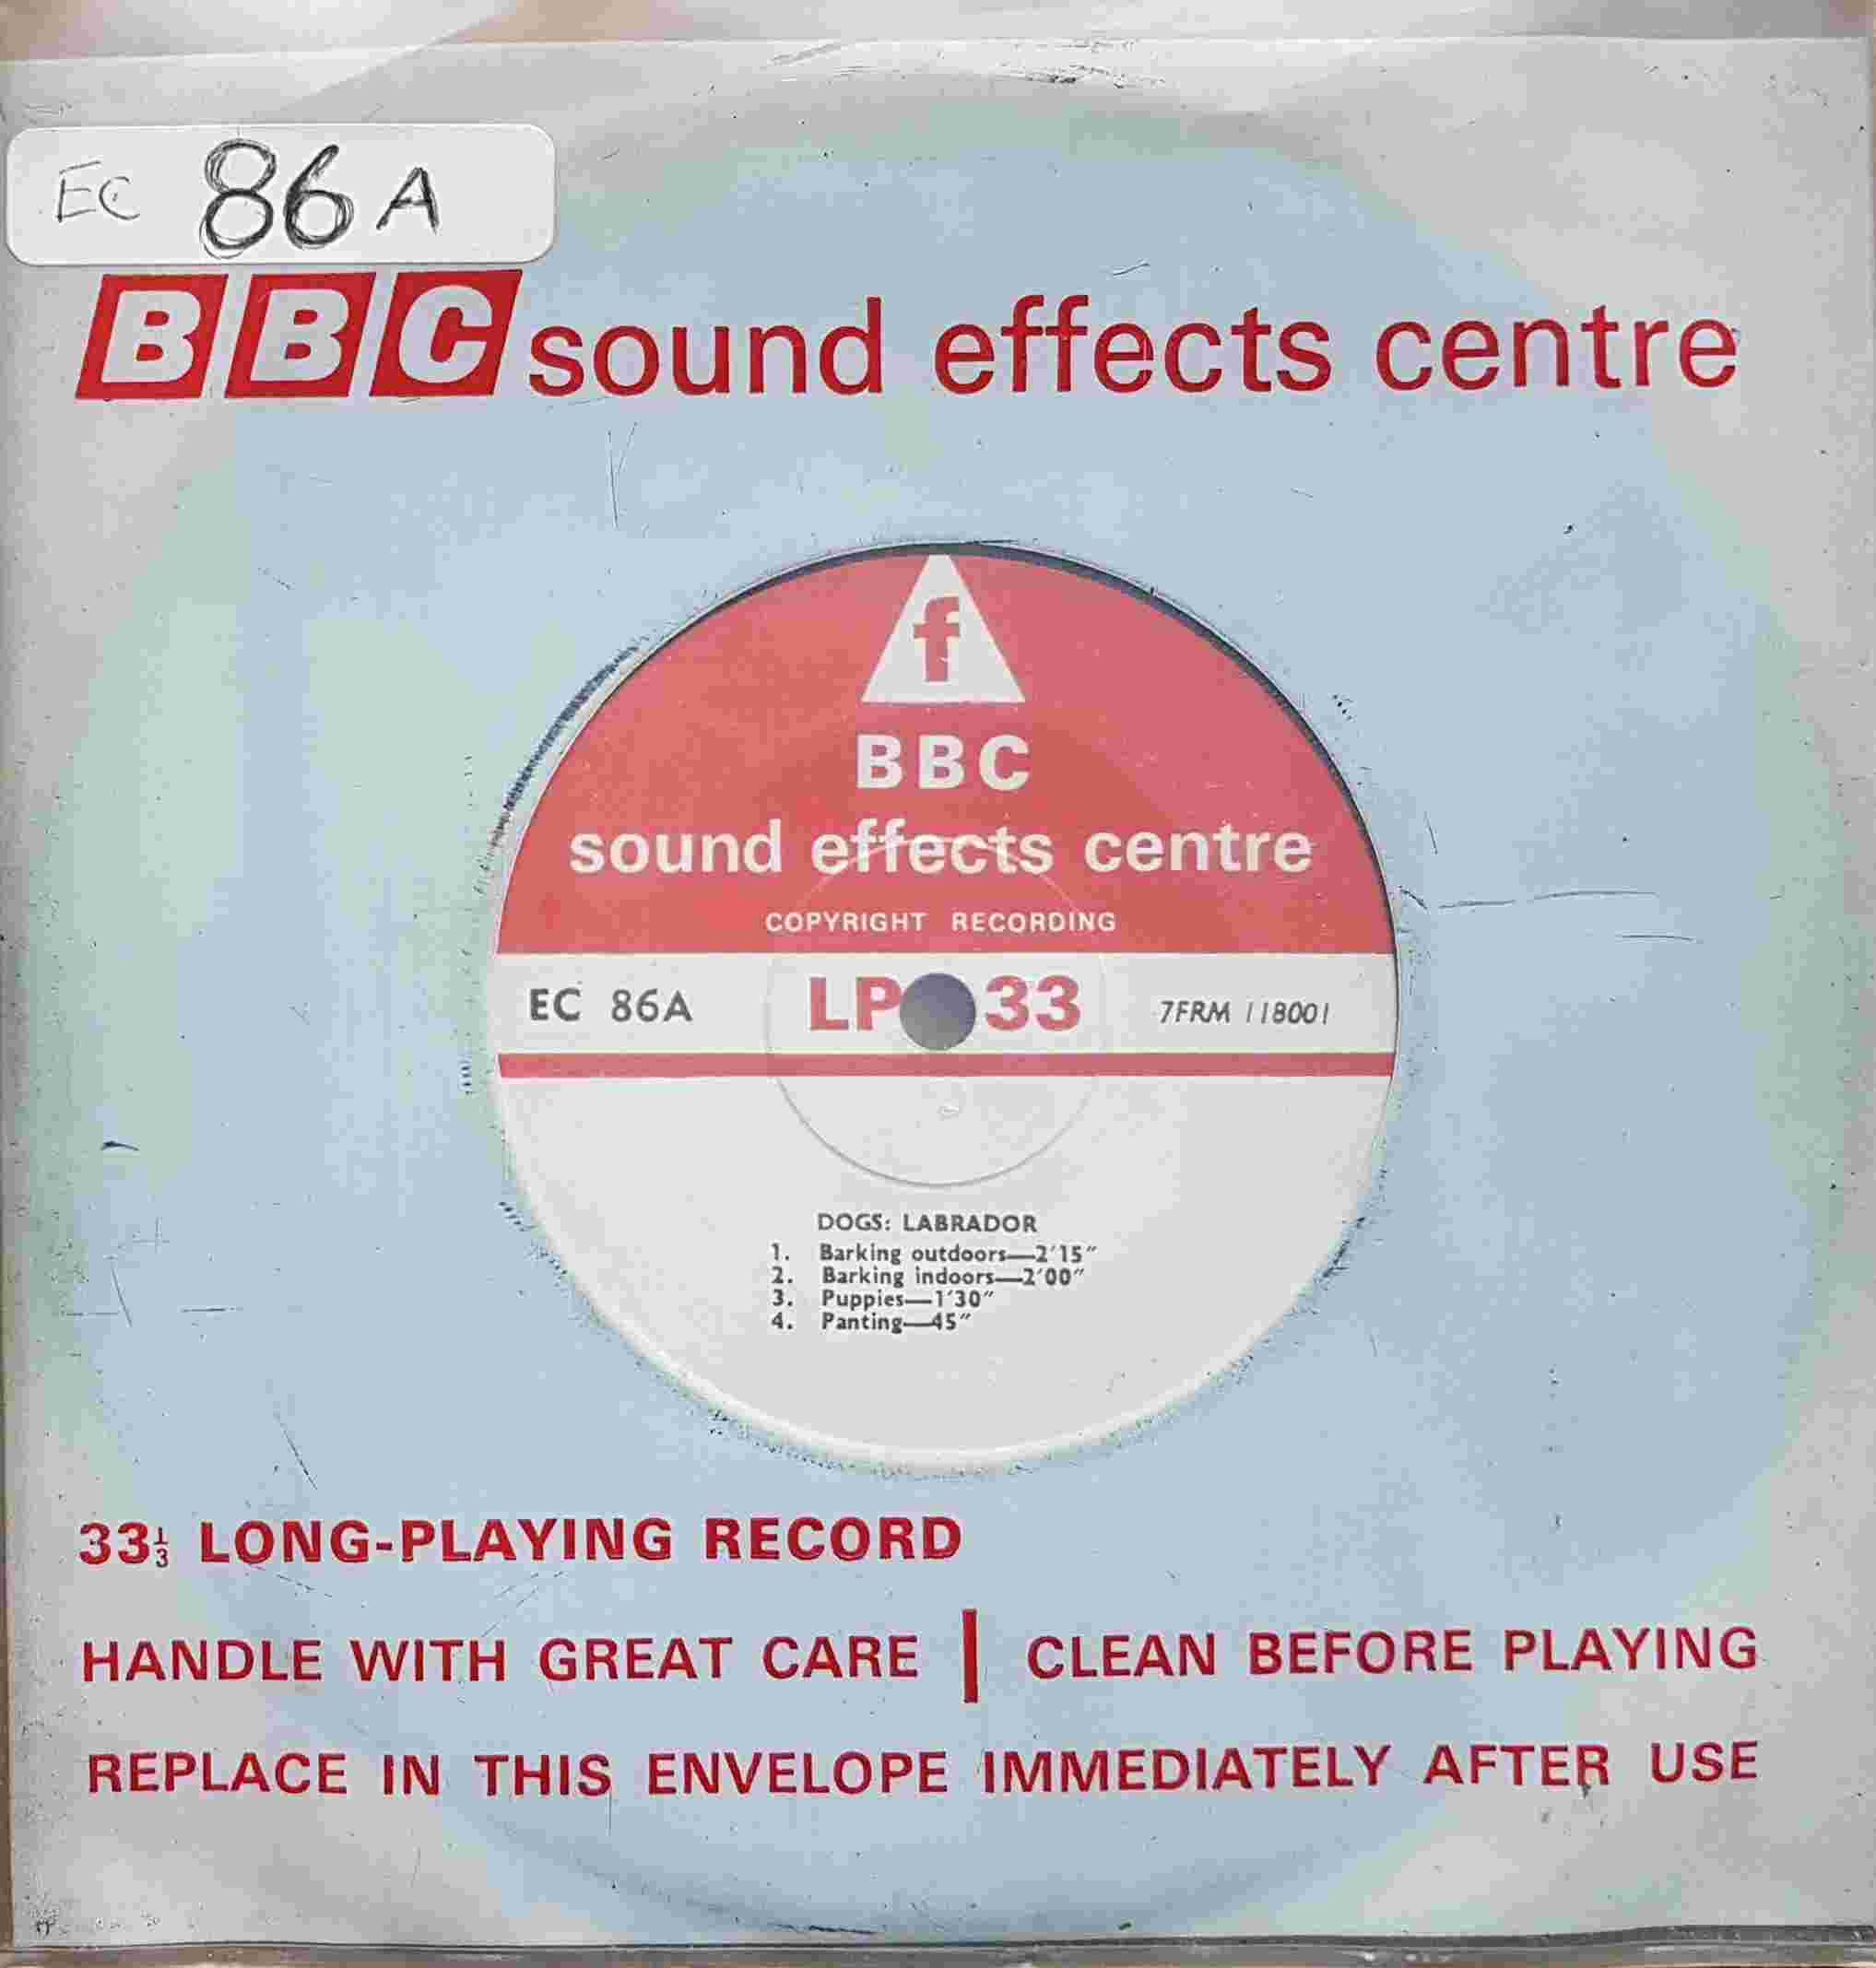 Picture of EC 86A Dogs by artist Not registered from the BBC singles - Records and Tapes library